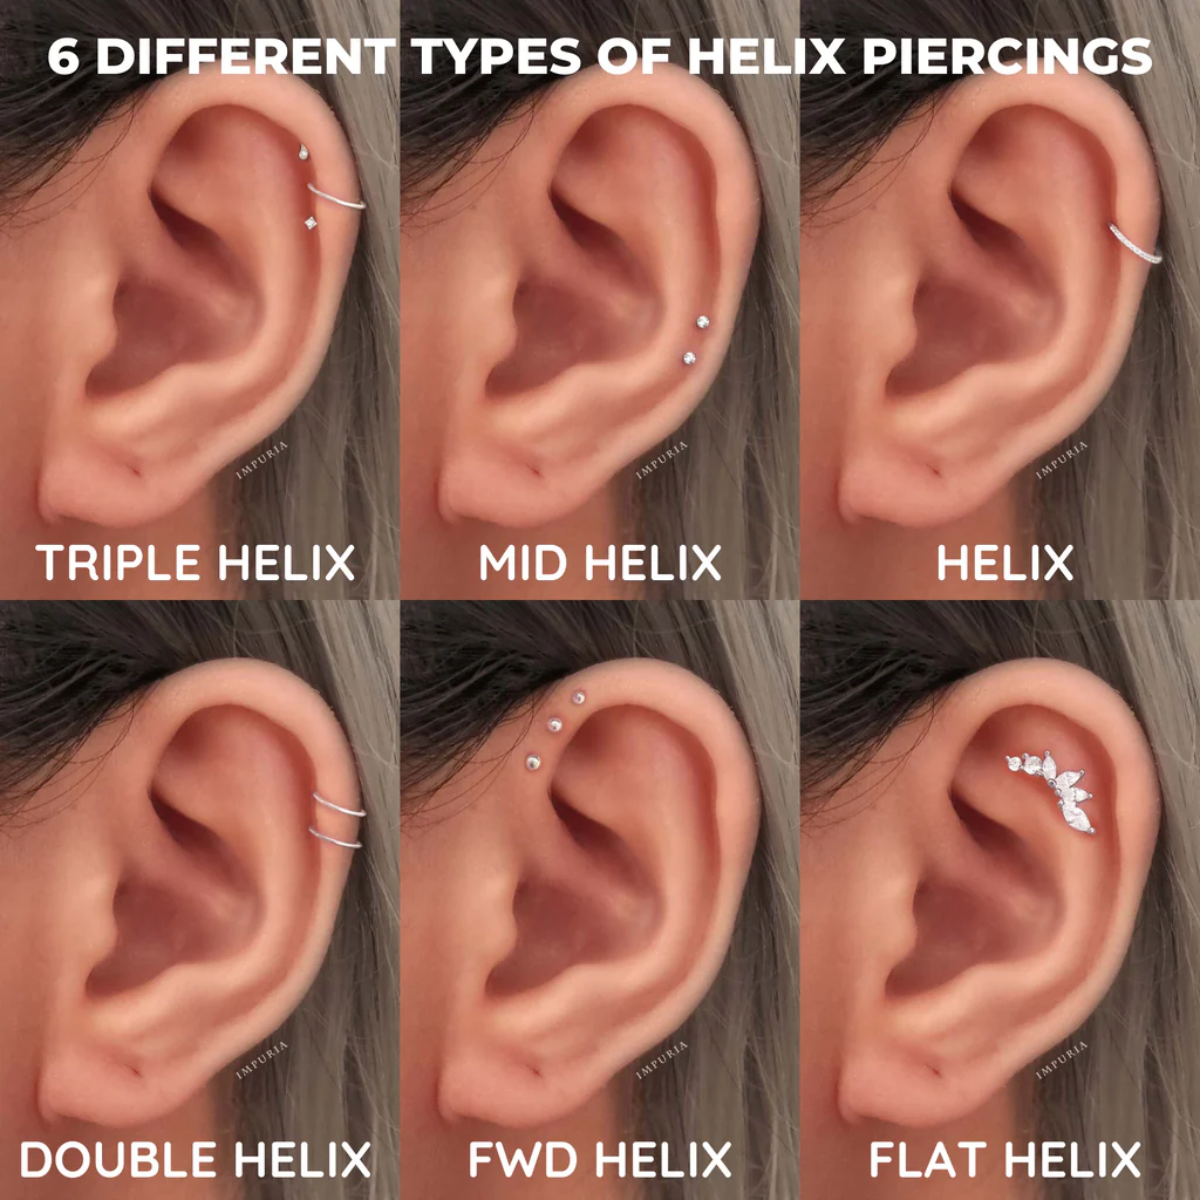 helix piercing different types of piercing